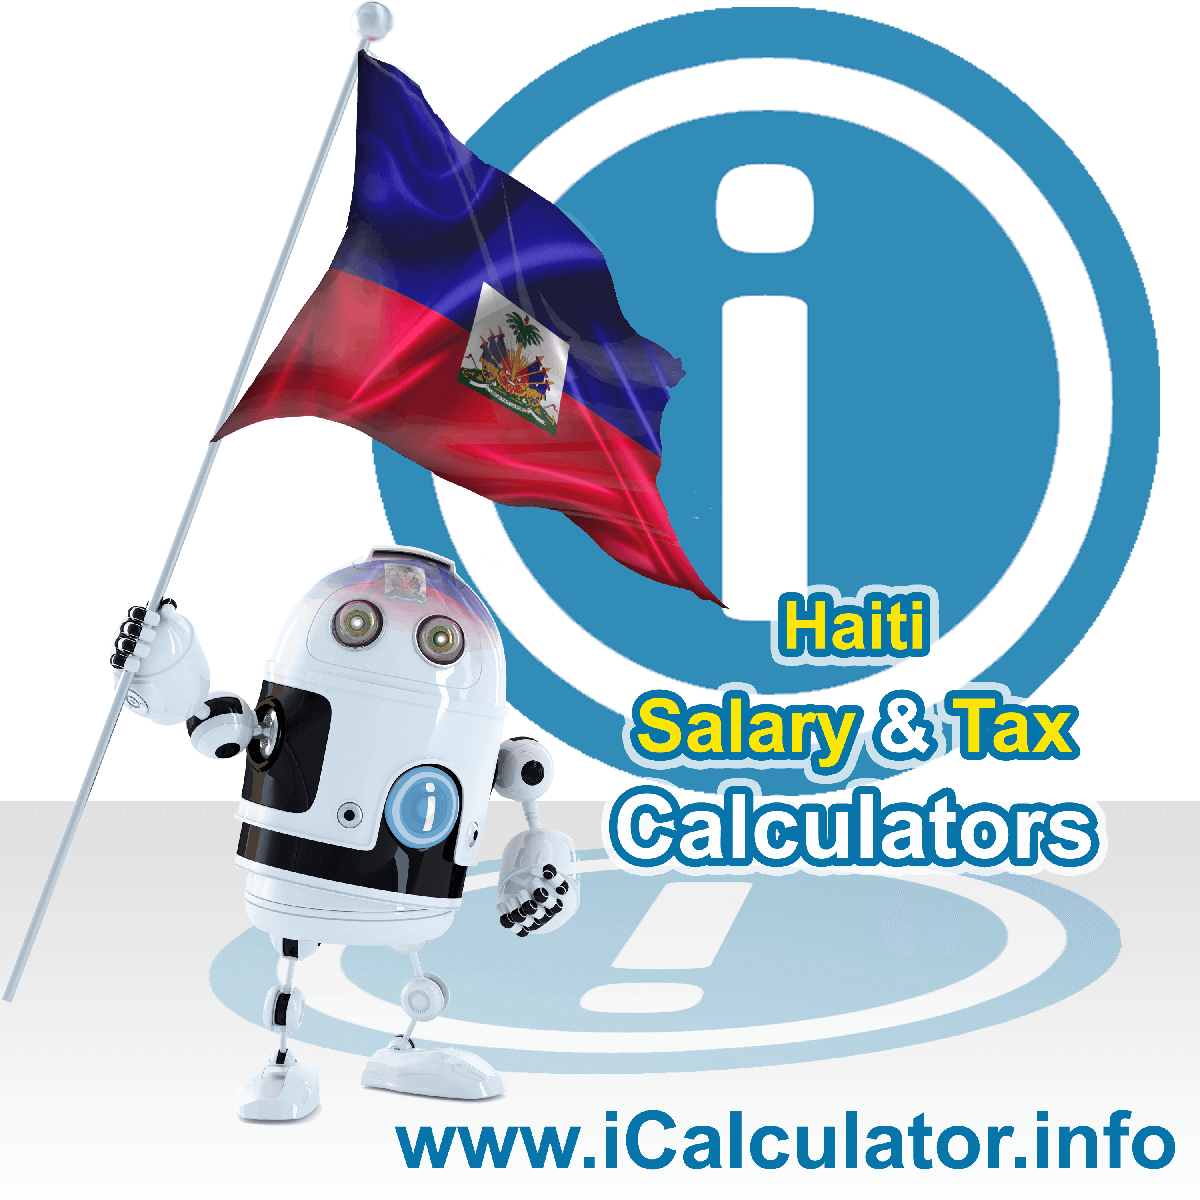 Haiti Salary Calculator. This image shows the Haitiese flag and information relating to the tax formula for the Haiti Tax Calculator